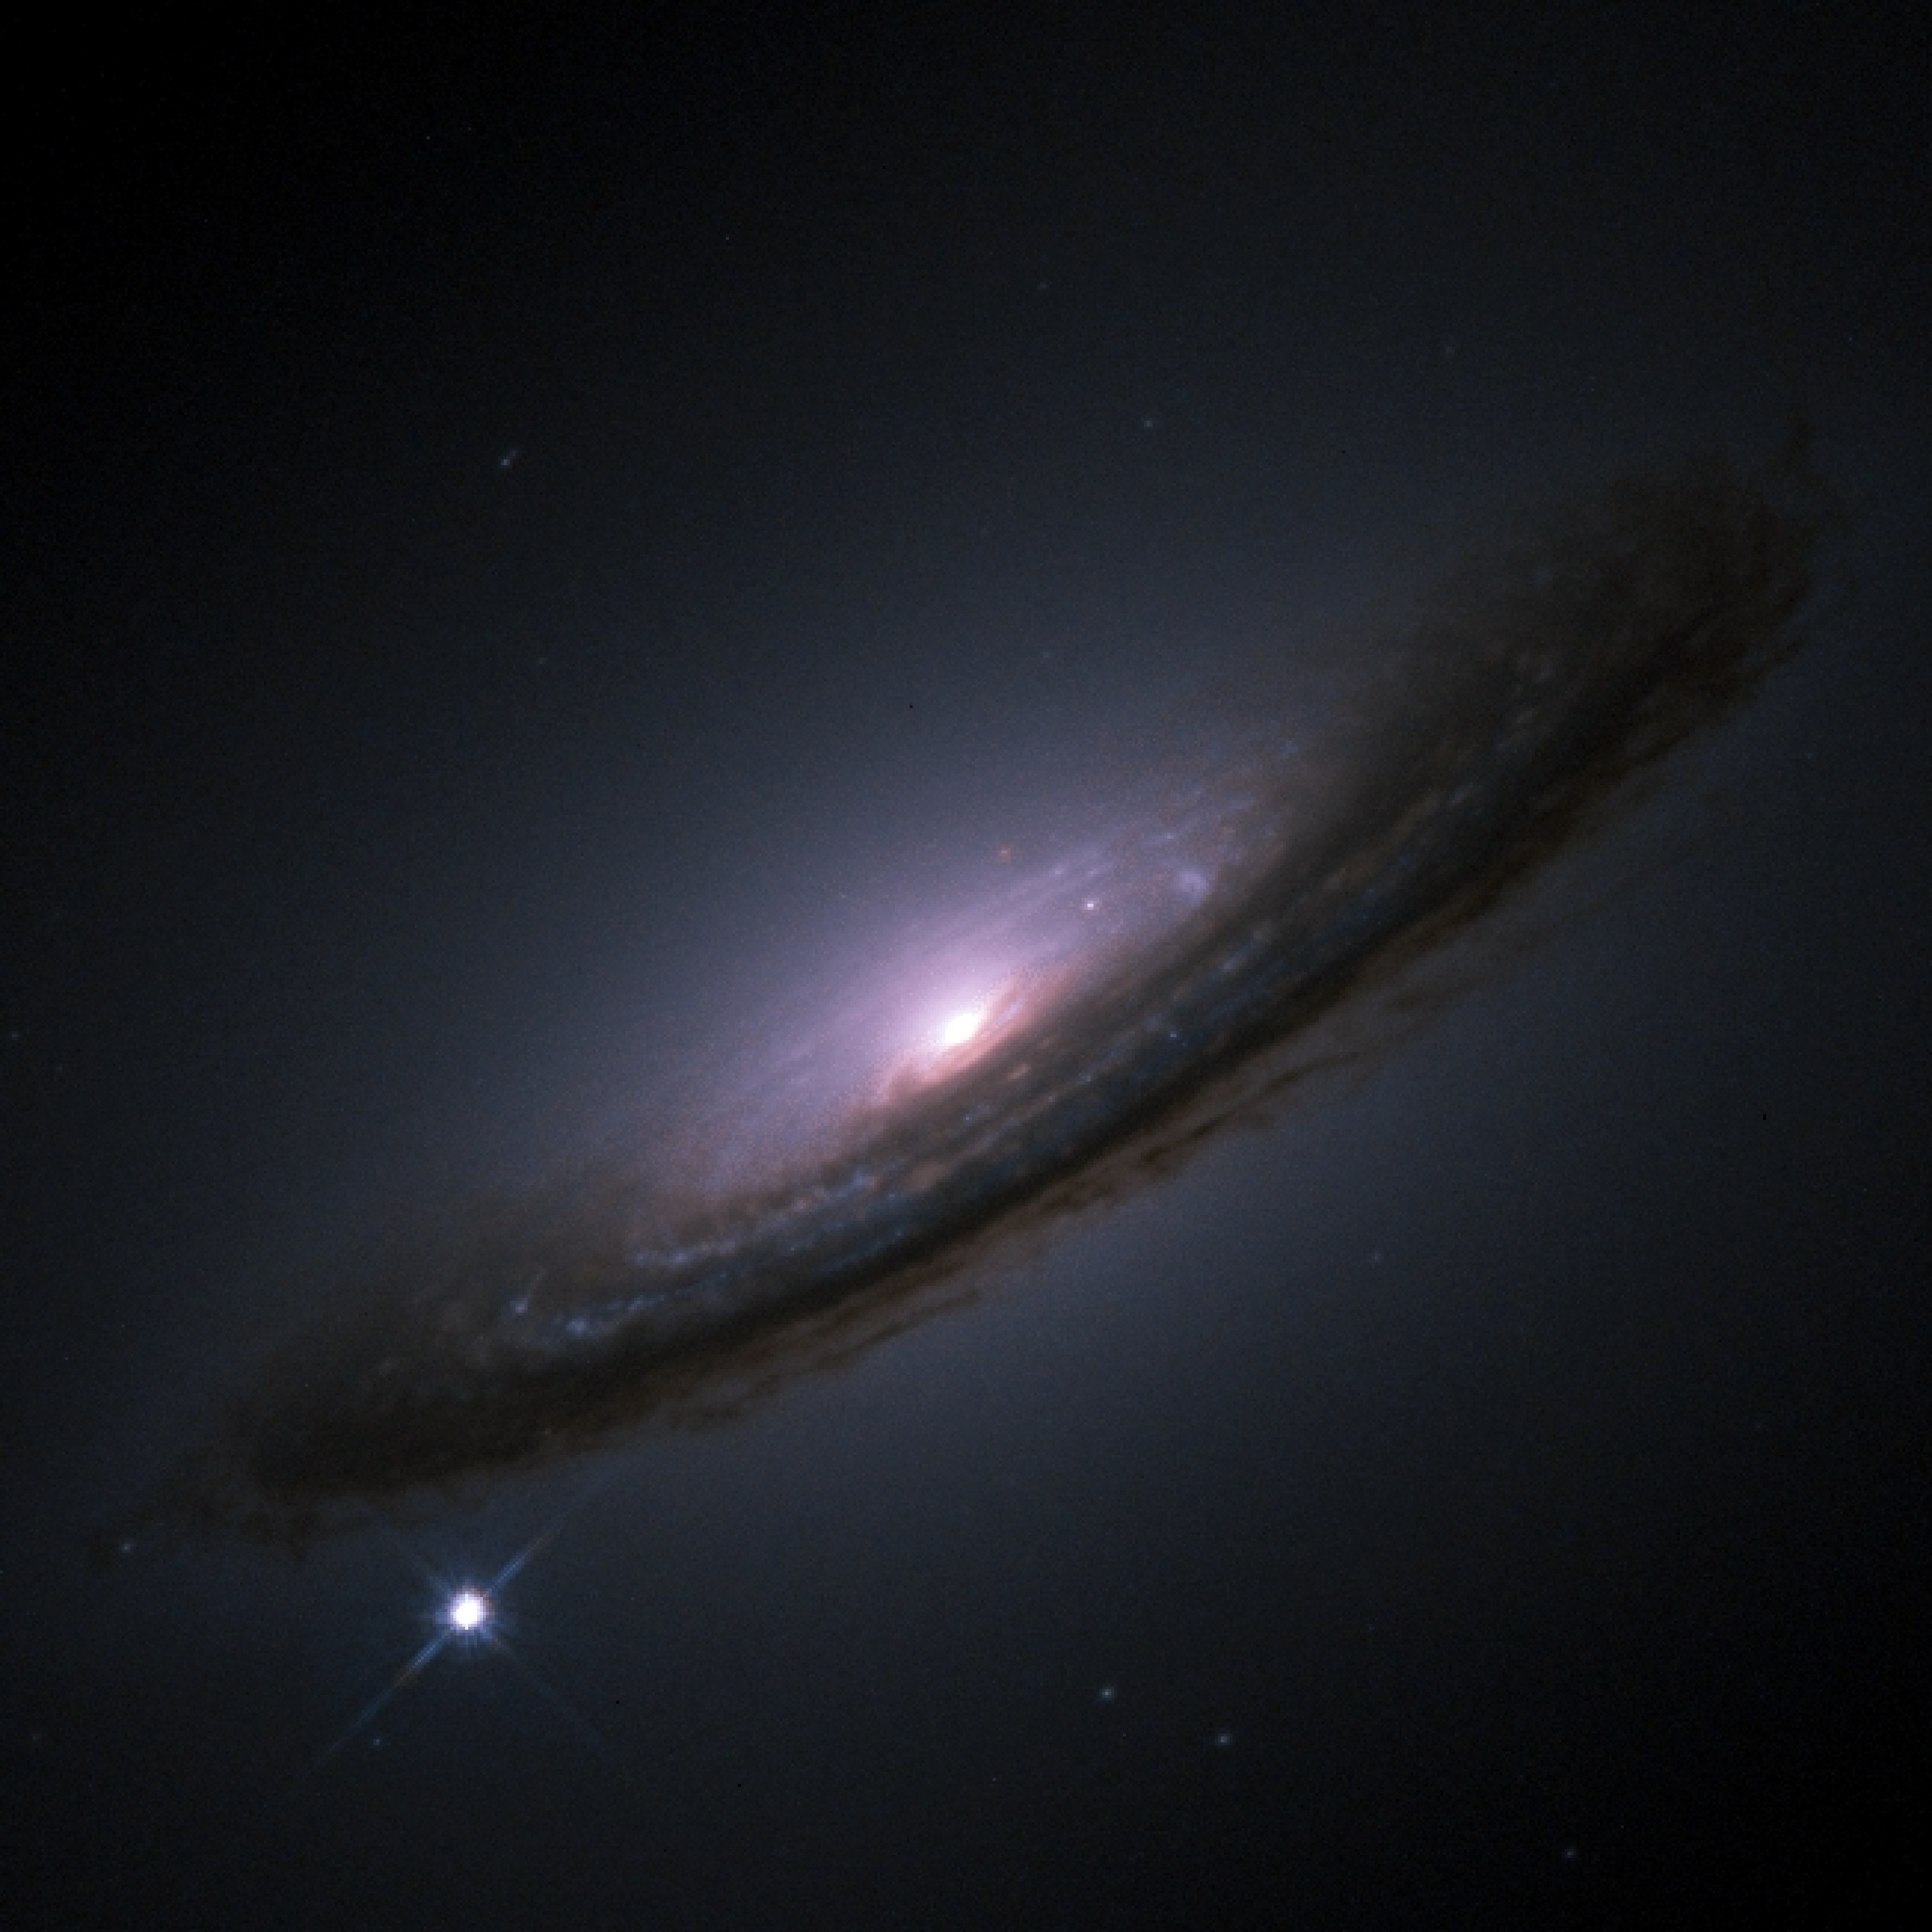 Supernova survey hints dark energy could be changing